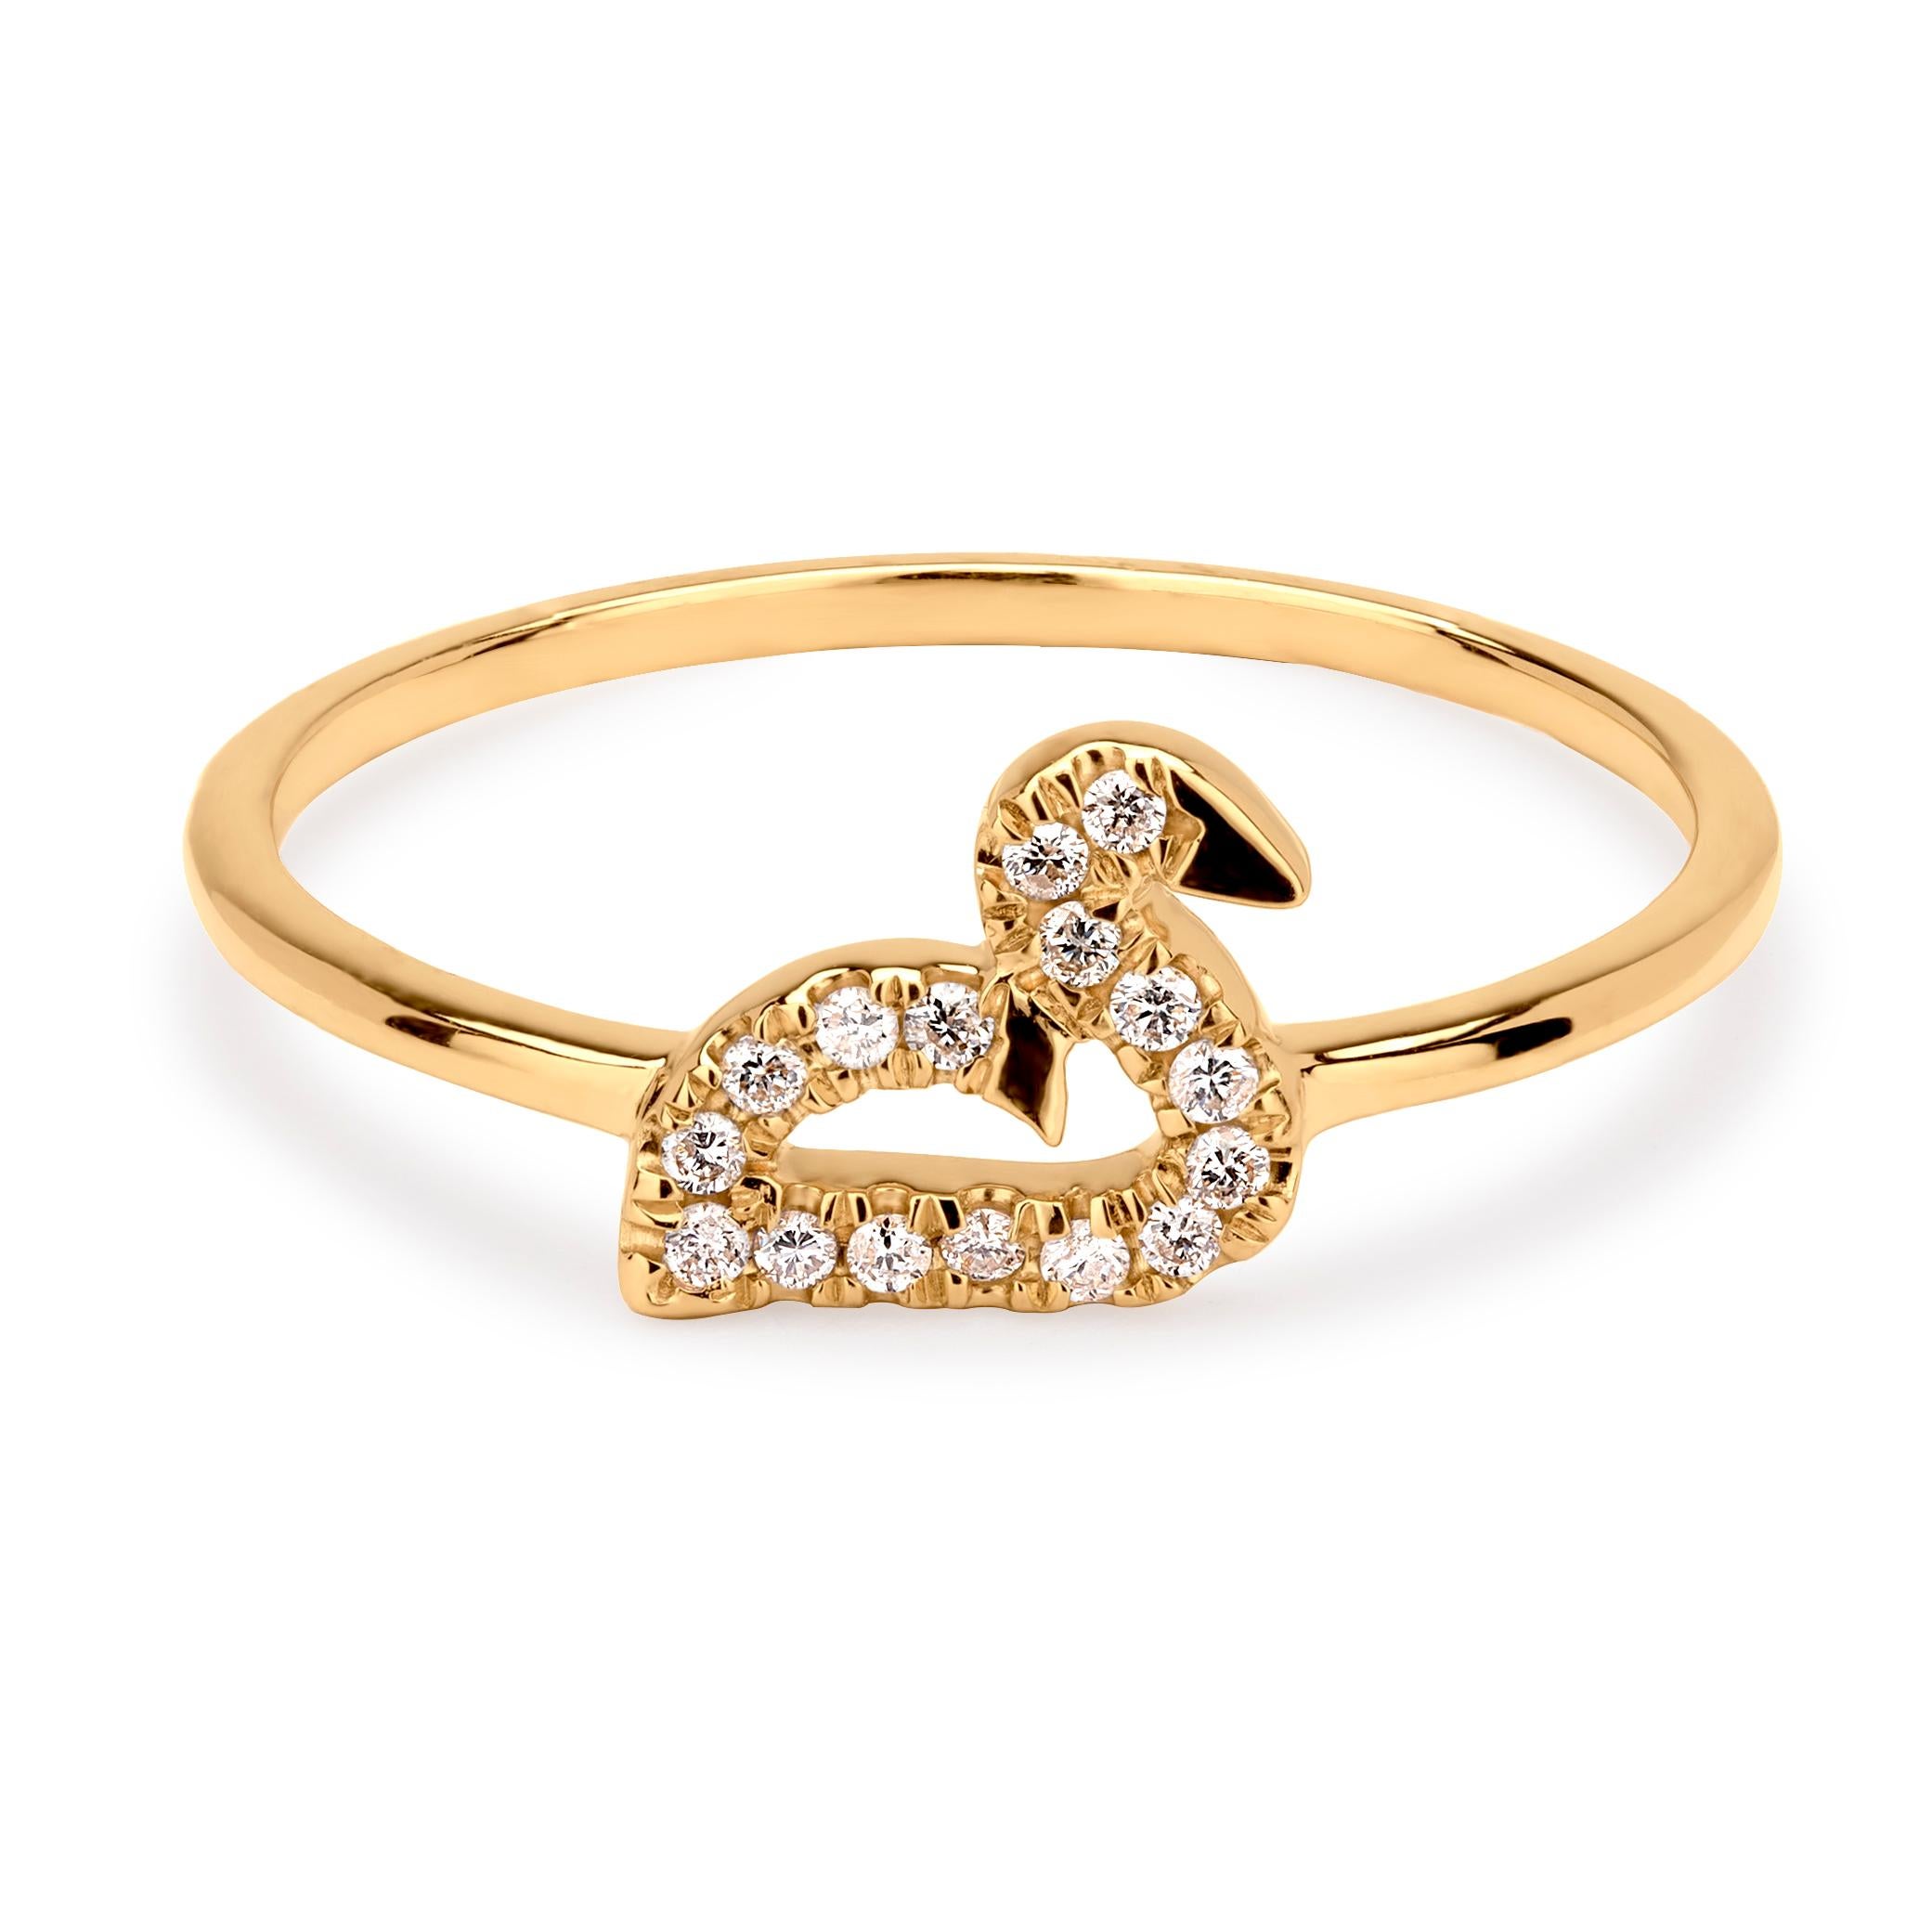 Grace your finger with a Luxle swan ring a symbol of fidelity and eternal love. Subtle yet pretty this swan ring is the new fashion statement. Featured with 16 round cut diamonds, totaling 0.08Cts, embellished in an open space swan motif of 18K